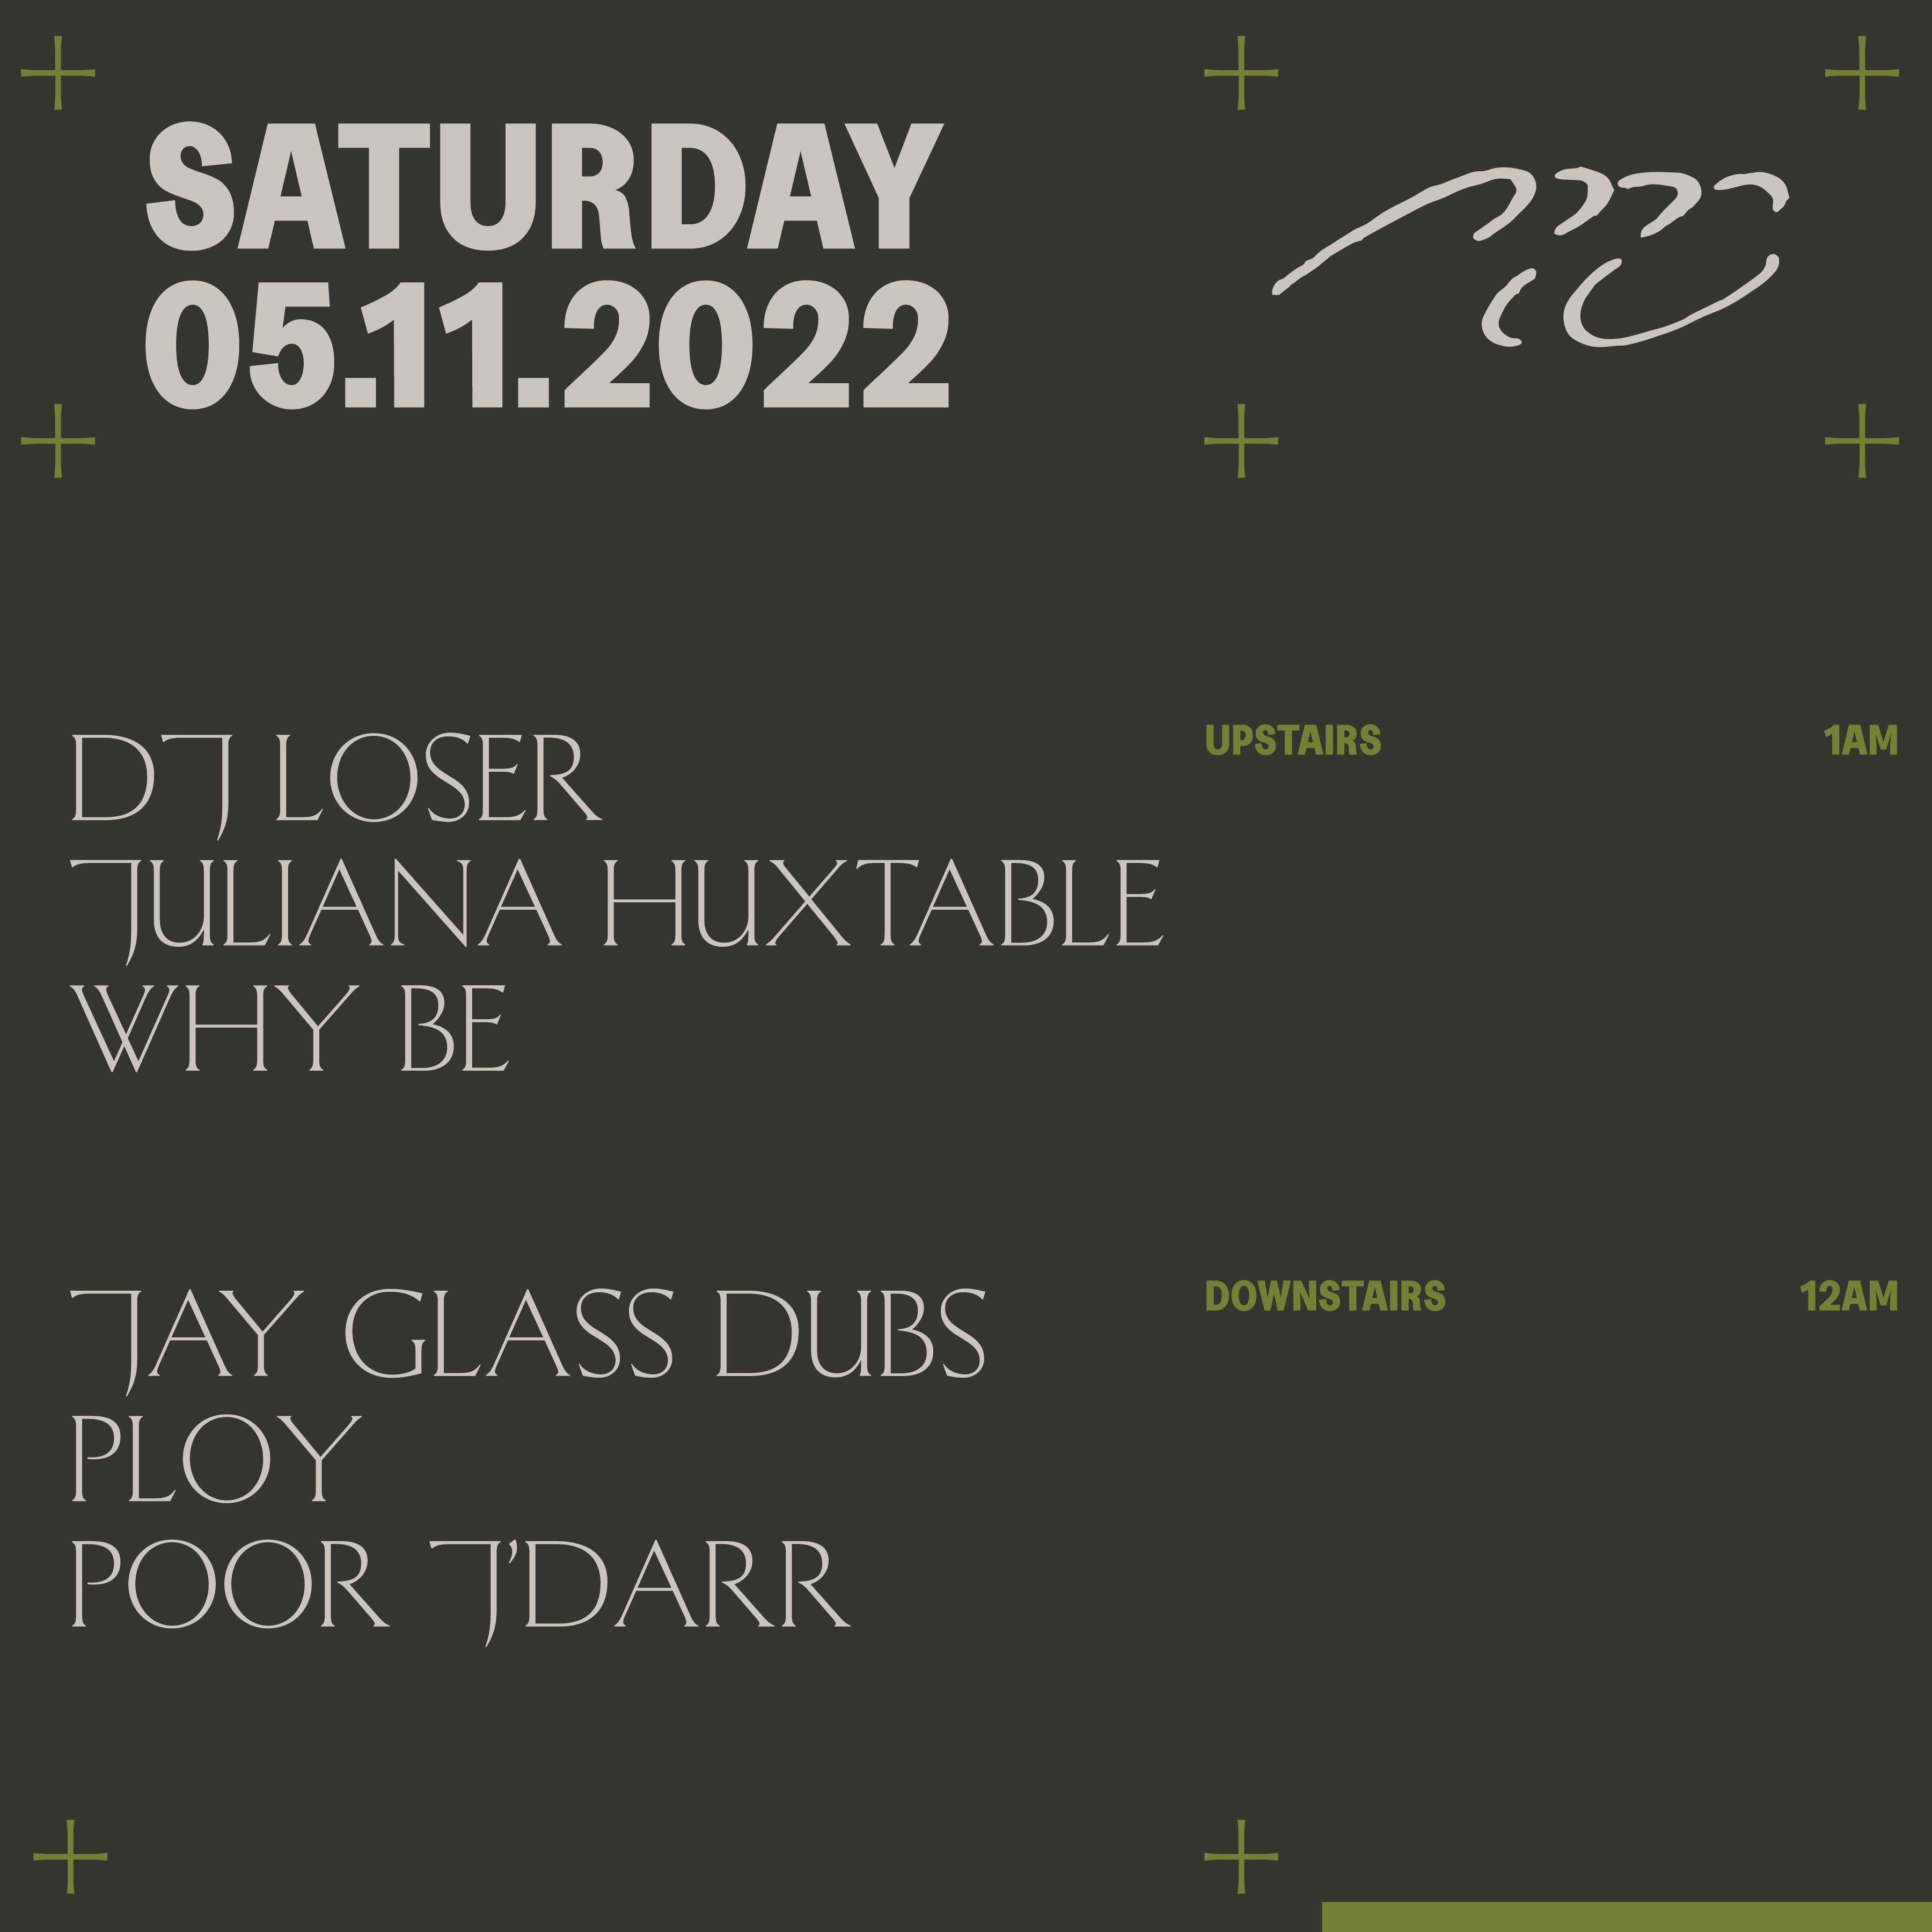 PTX / DJ LOSER, Jay Glass Dubs, Juliana Huxtable, Ploy, Poor J'Darr, Why Be - フライヤー裏